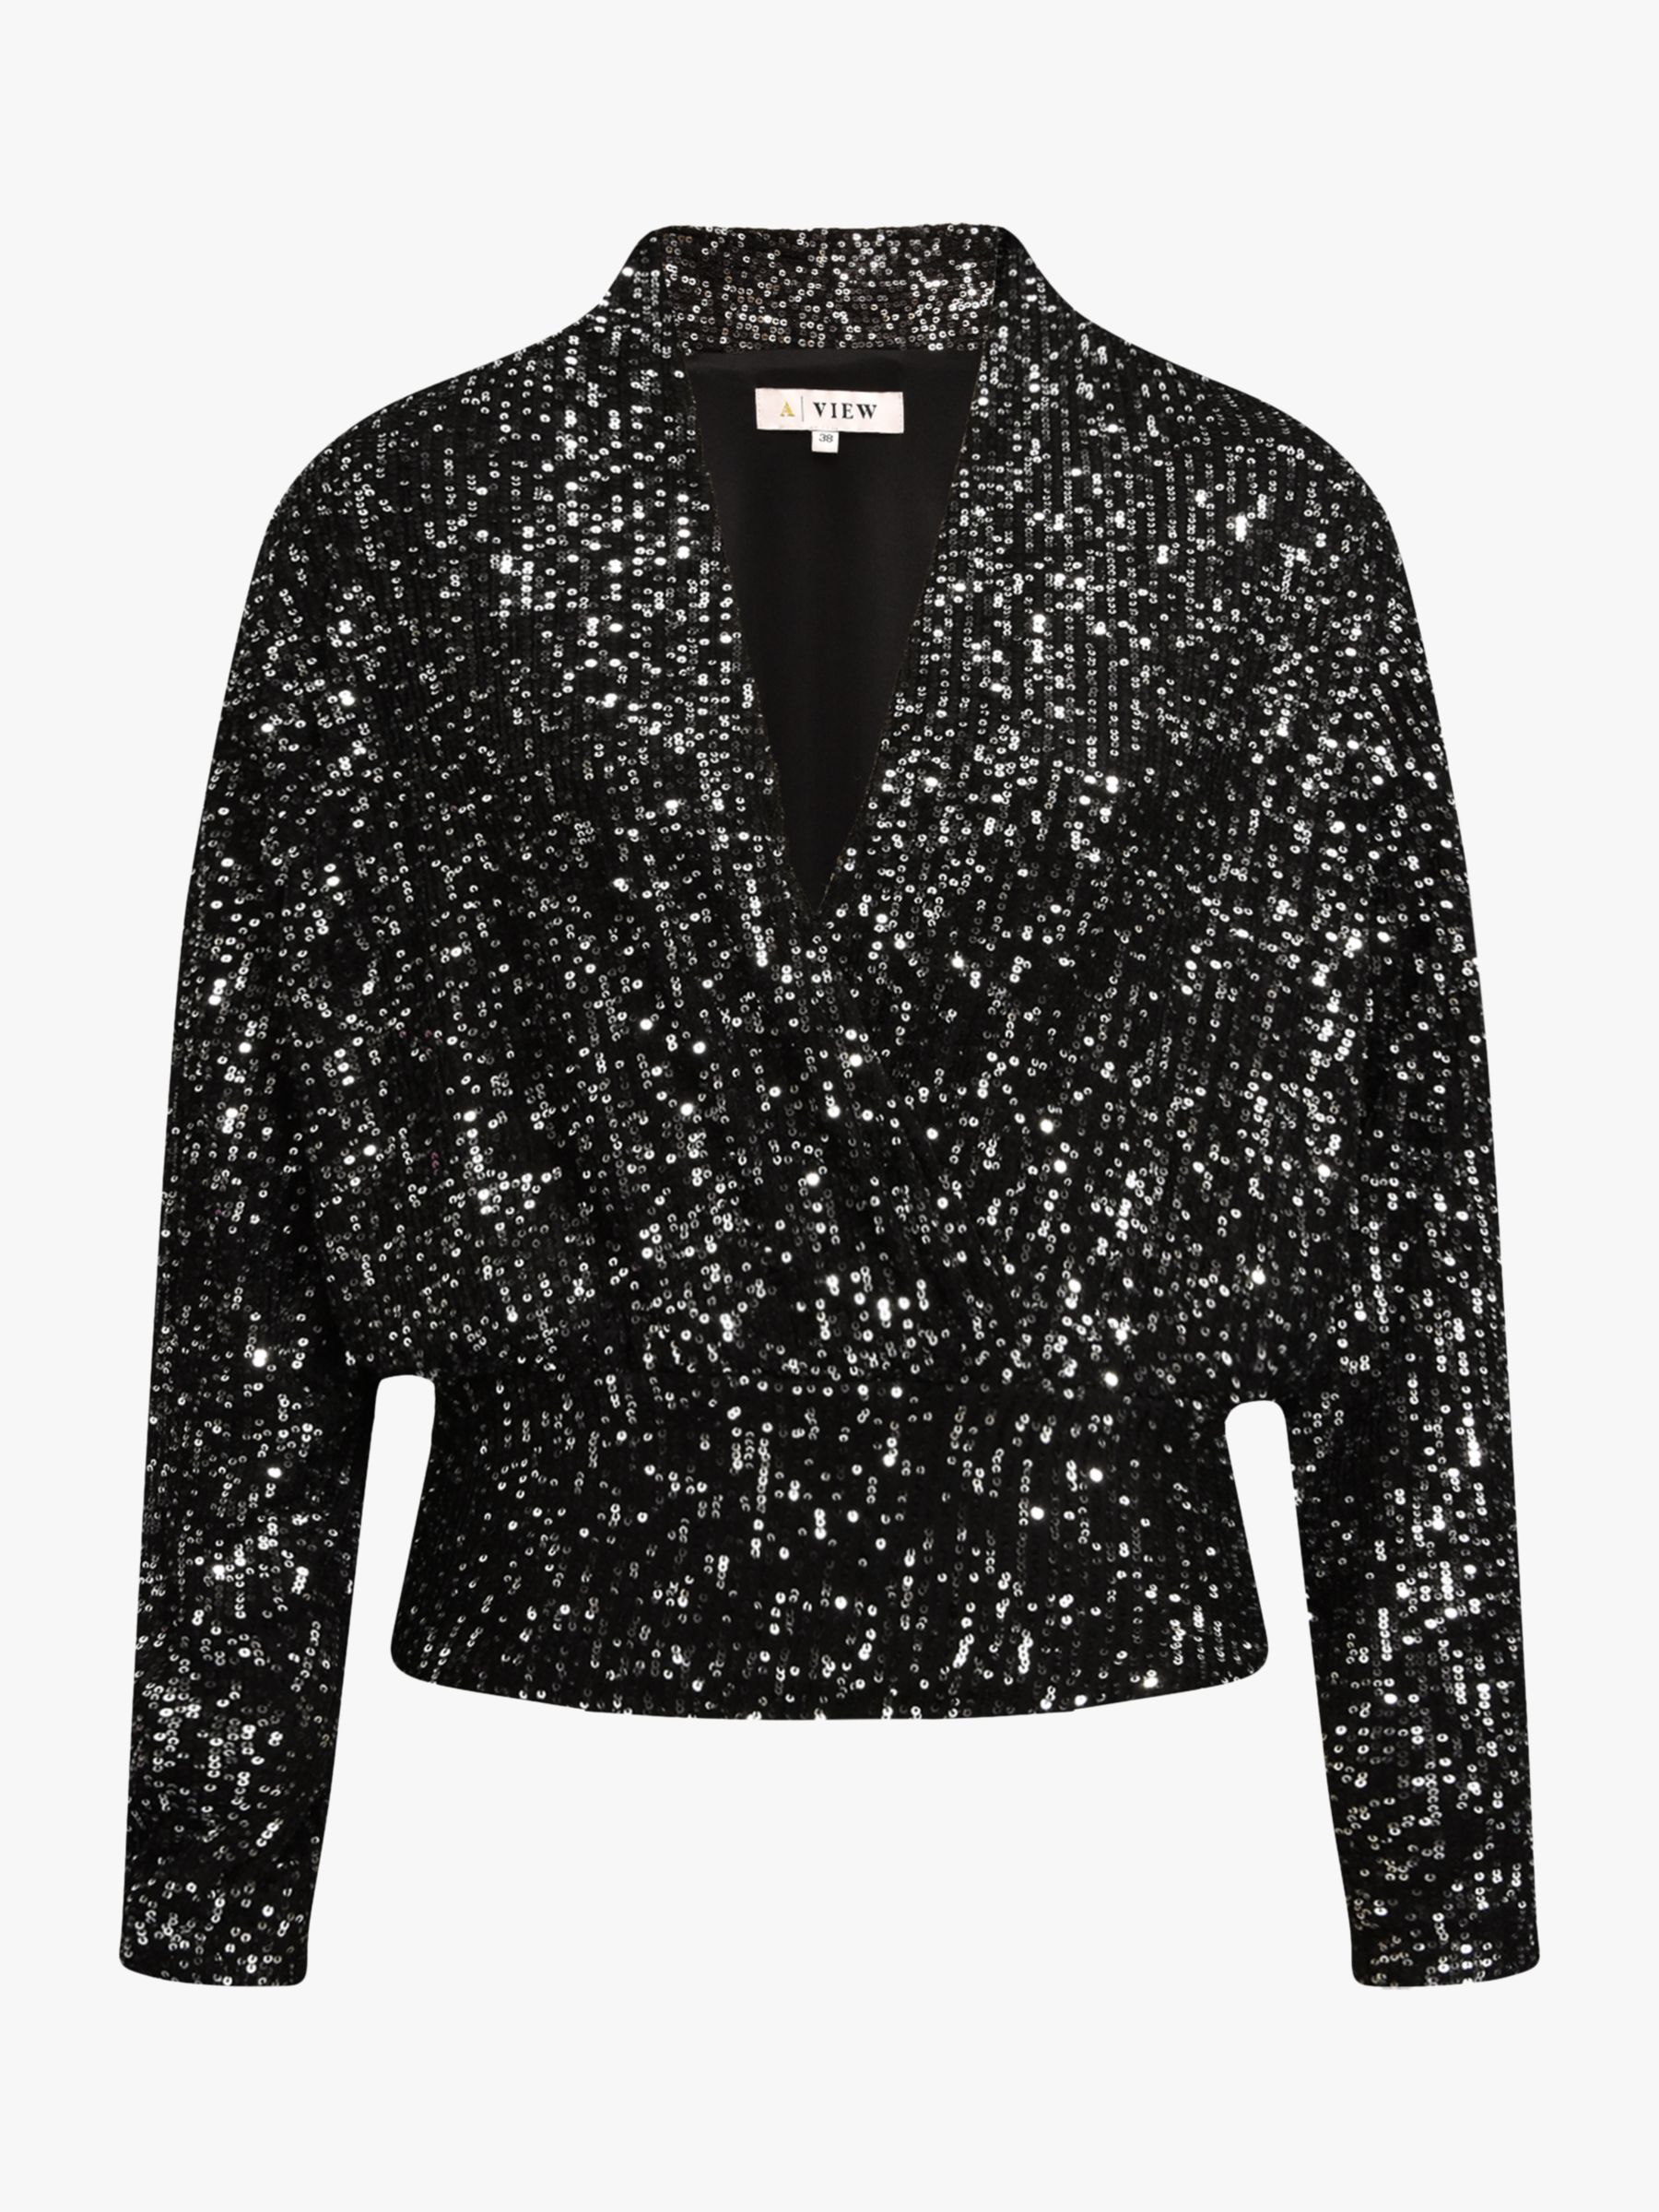 A-VIEW Alexi Sequin Long Sleeve Blouse, Black at John Lewis & Partners